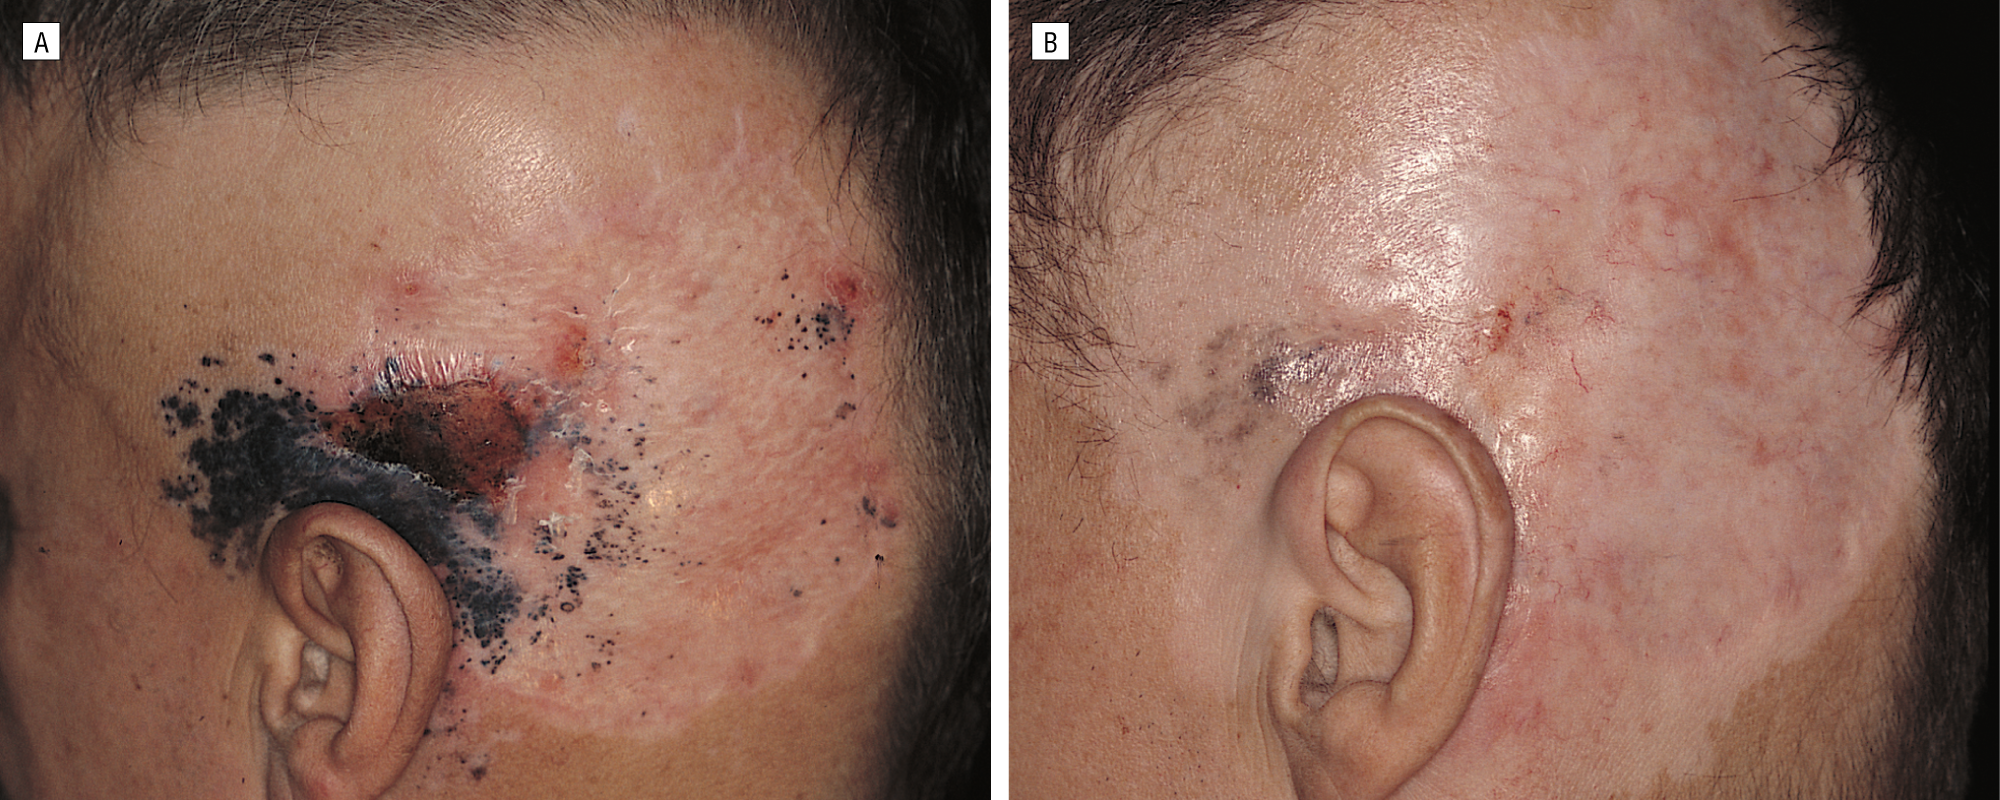 Topical Imiquimod in the Treatment of Metastatic Melanoma to Skin ...